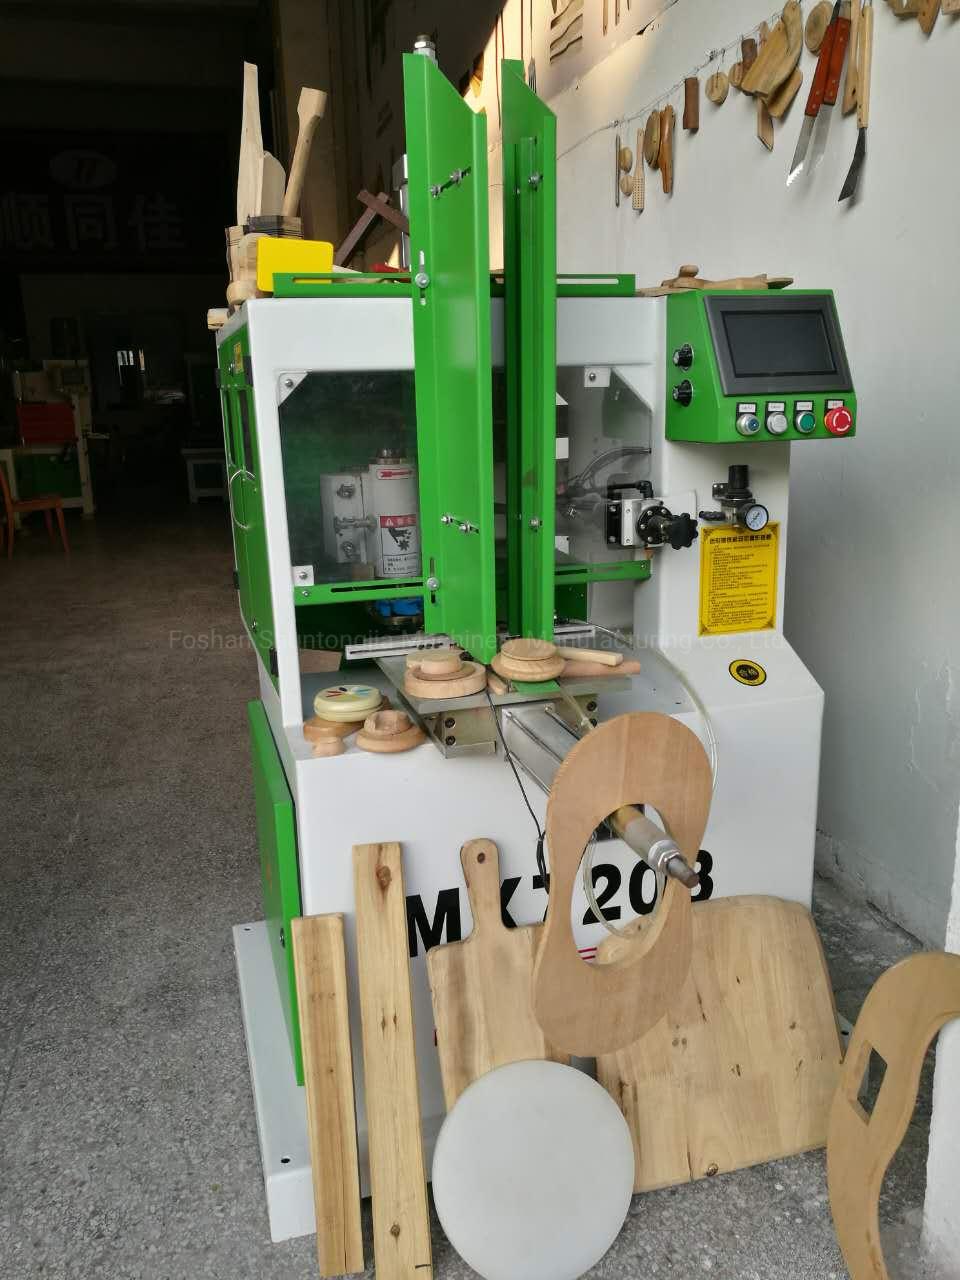 Automatic CNC Molding Equipment, Woodworking Equipment, Processing Toys, Wooden Lid, Wooden Brush, Toothbrush, etc. CNC Engraving Machines.